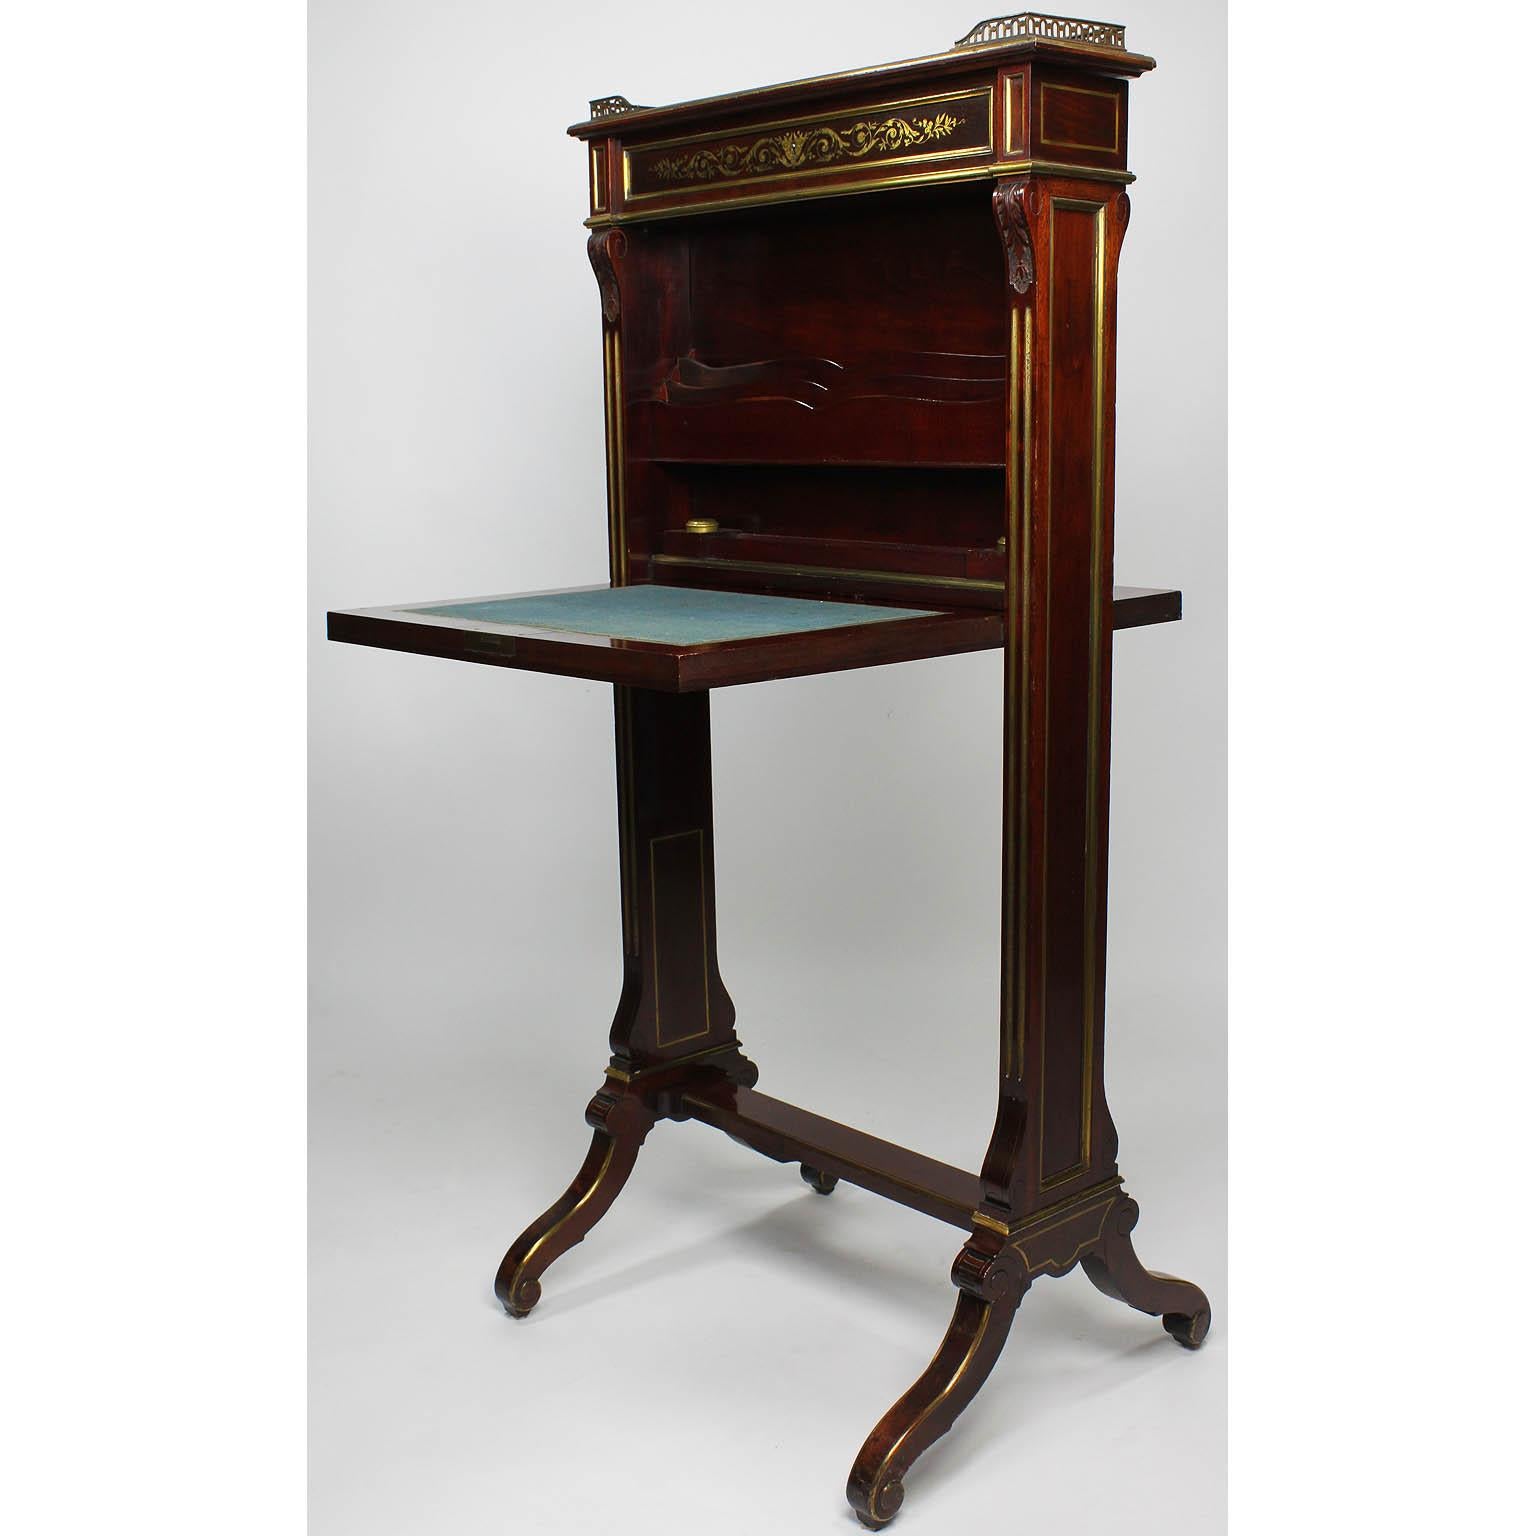 A fine and rare French 19th century Louis XIV style mahogany and brass inlaid drop-front freestanding secretary desk in the manner of André-Charles Boulle. The slender mahogany body centered with a finely chased gilt-brass inlaid floral and